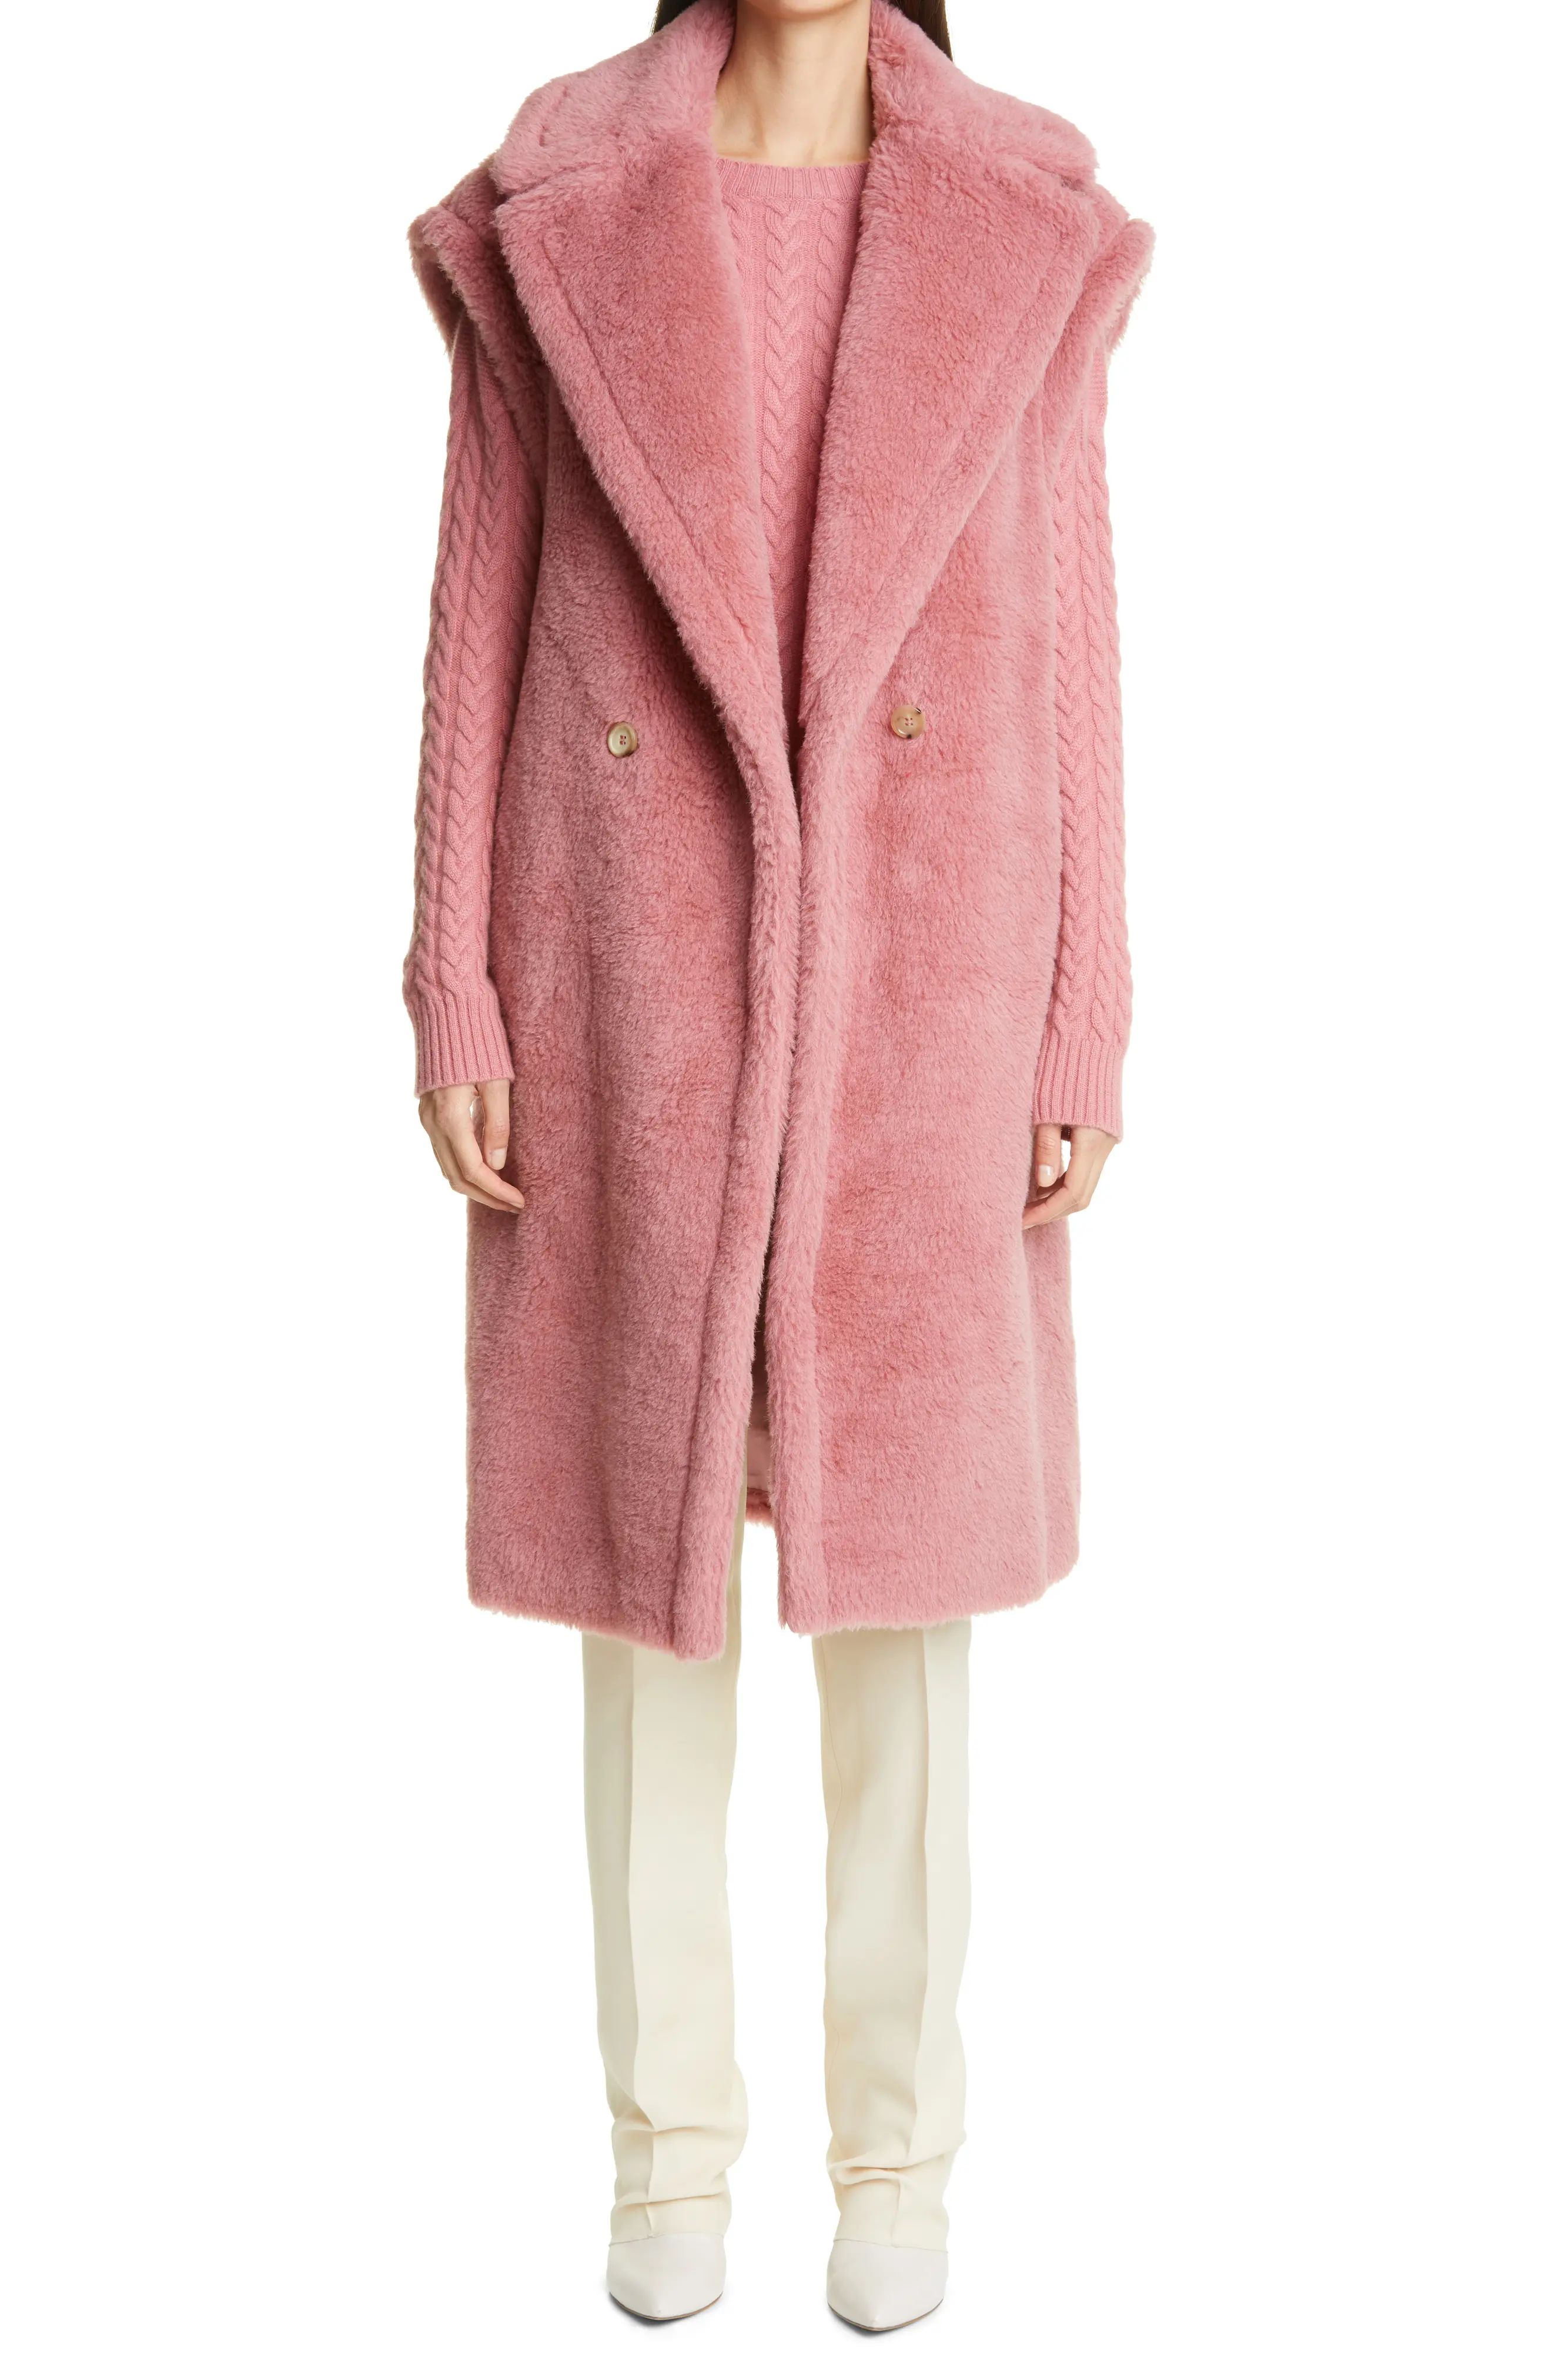 Women's Max Mara Gettata Double Breasted Alpaca Blend Gilet, Size Small - Pink | Nordstrom